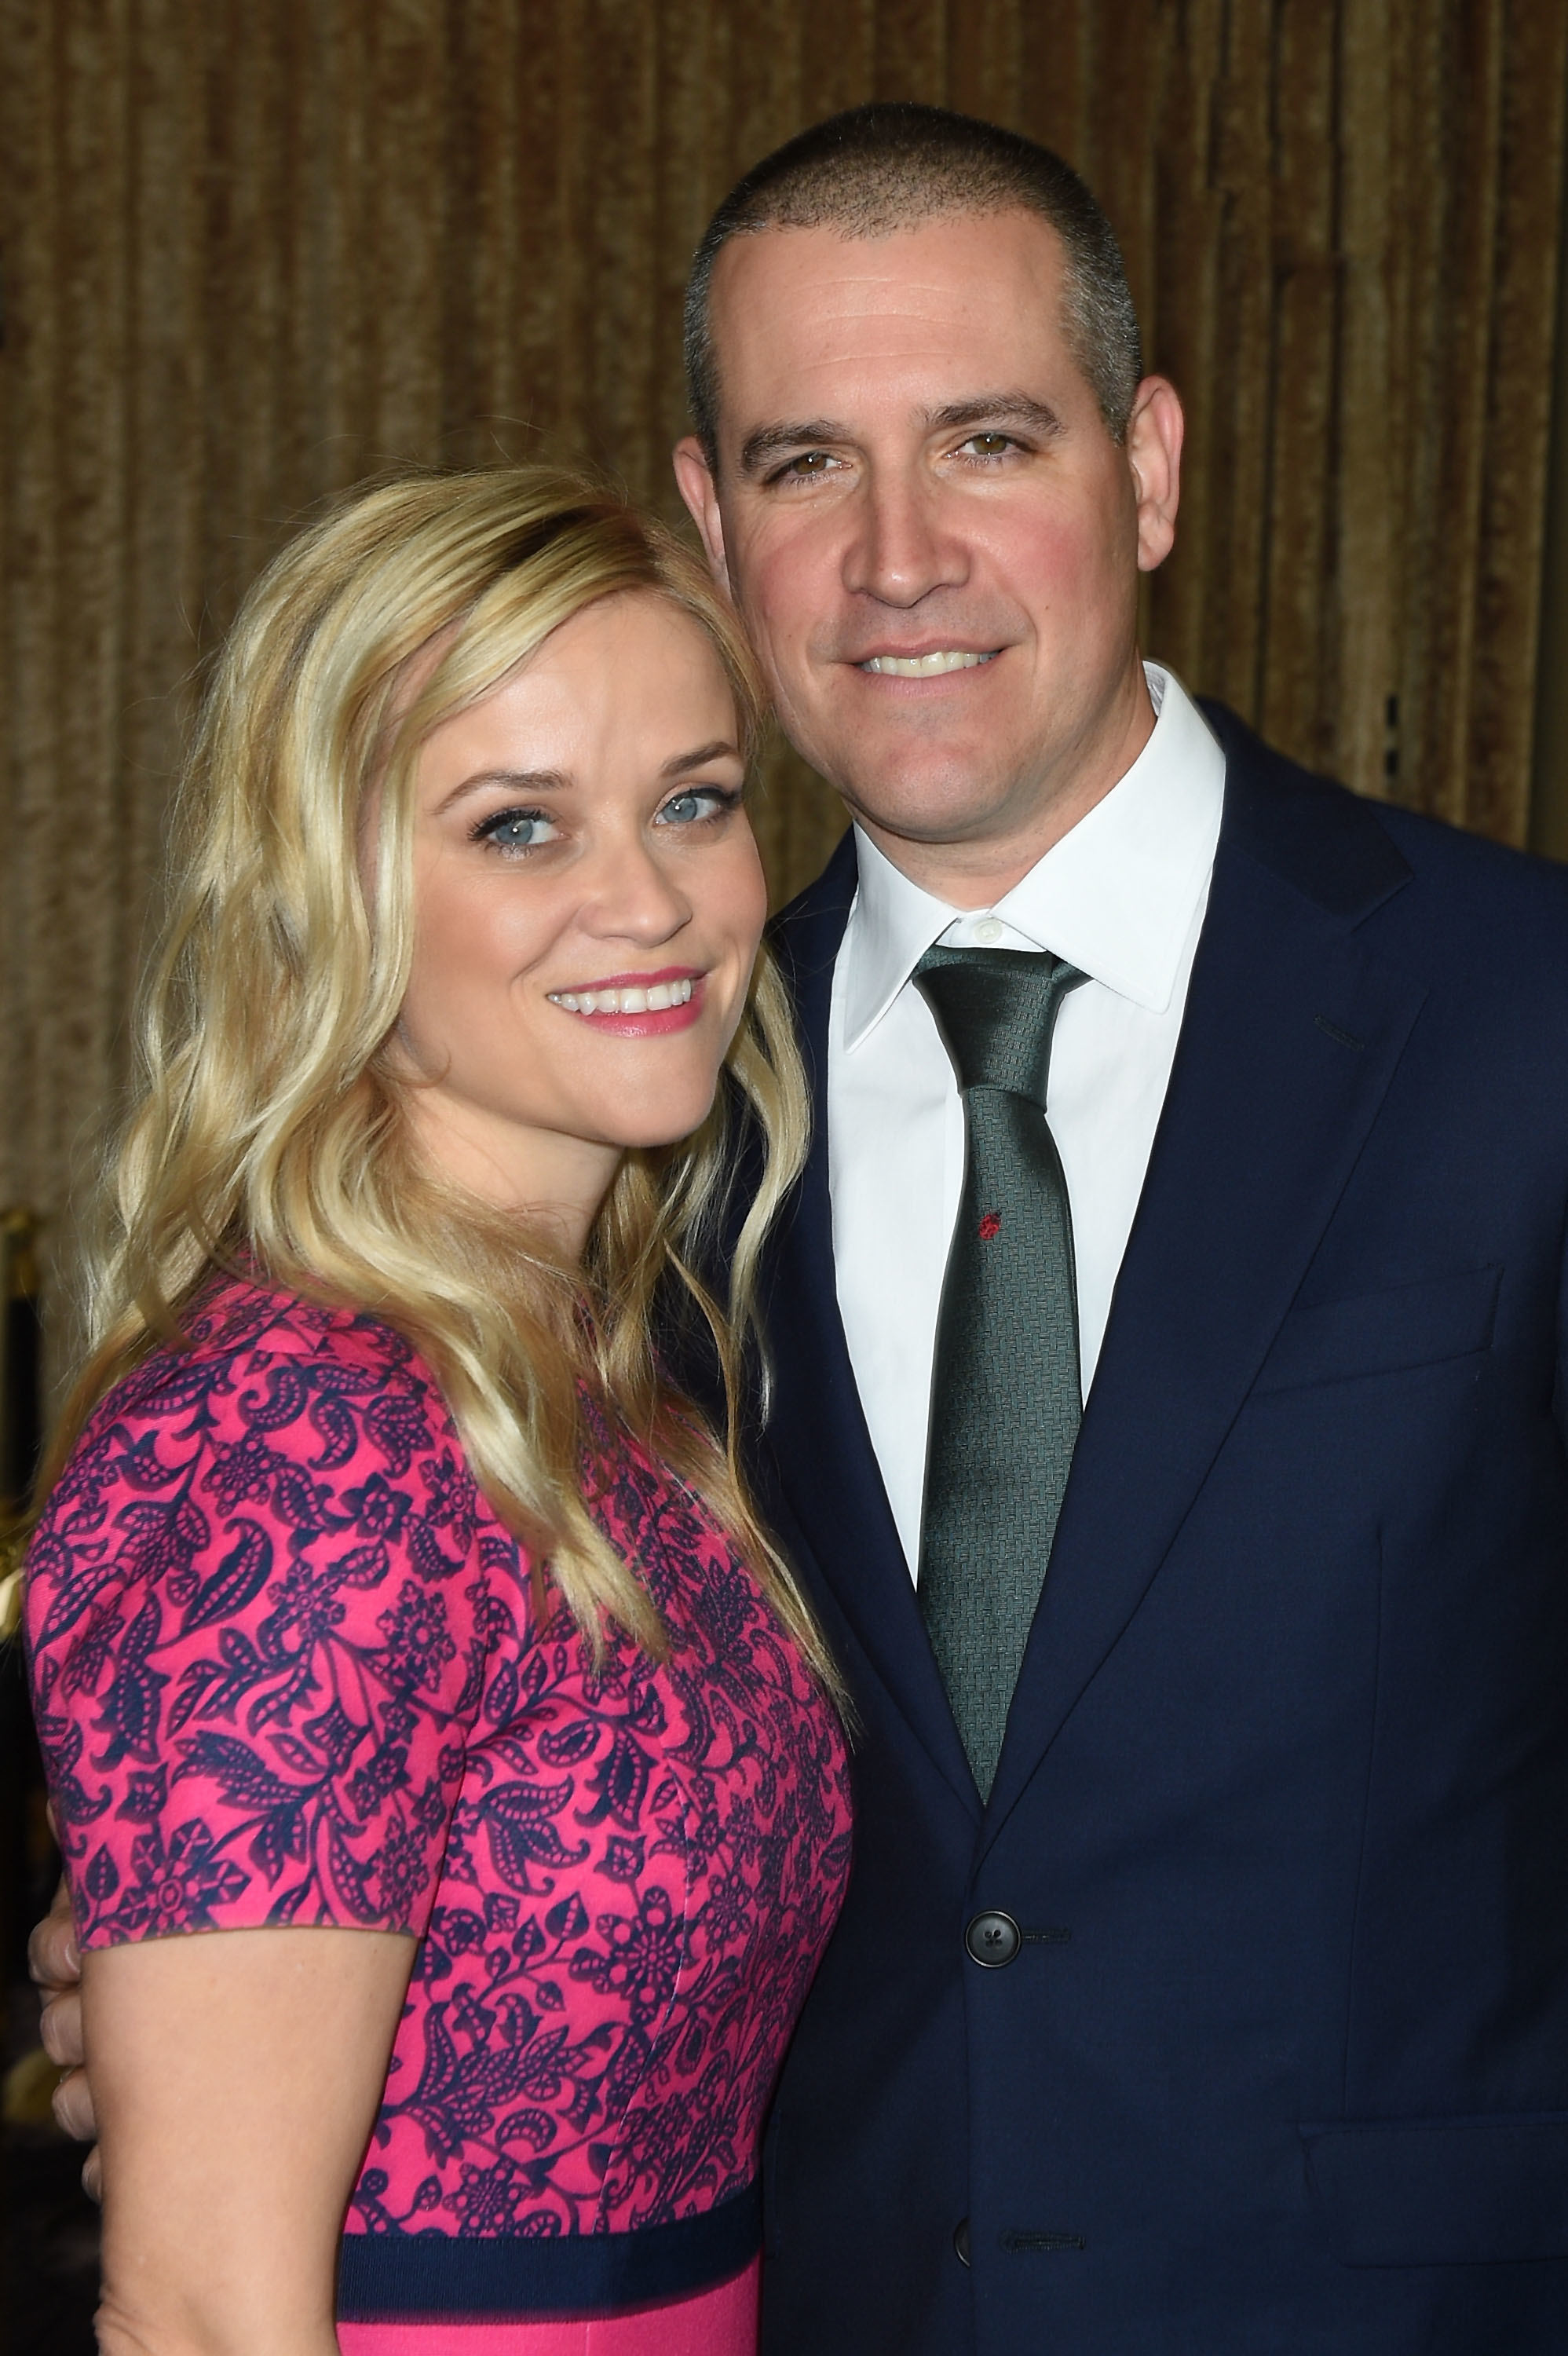 Close-up of Reese and Jim smiling